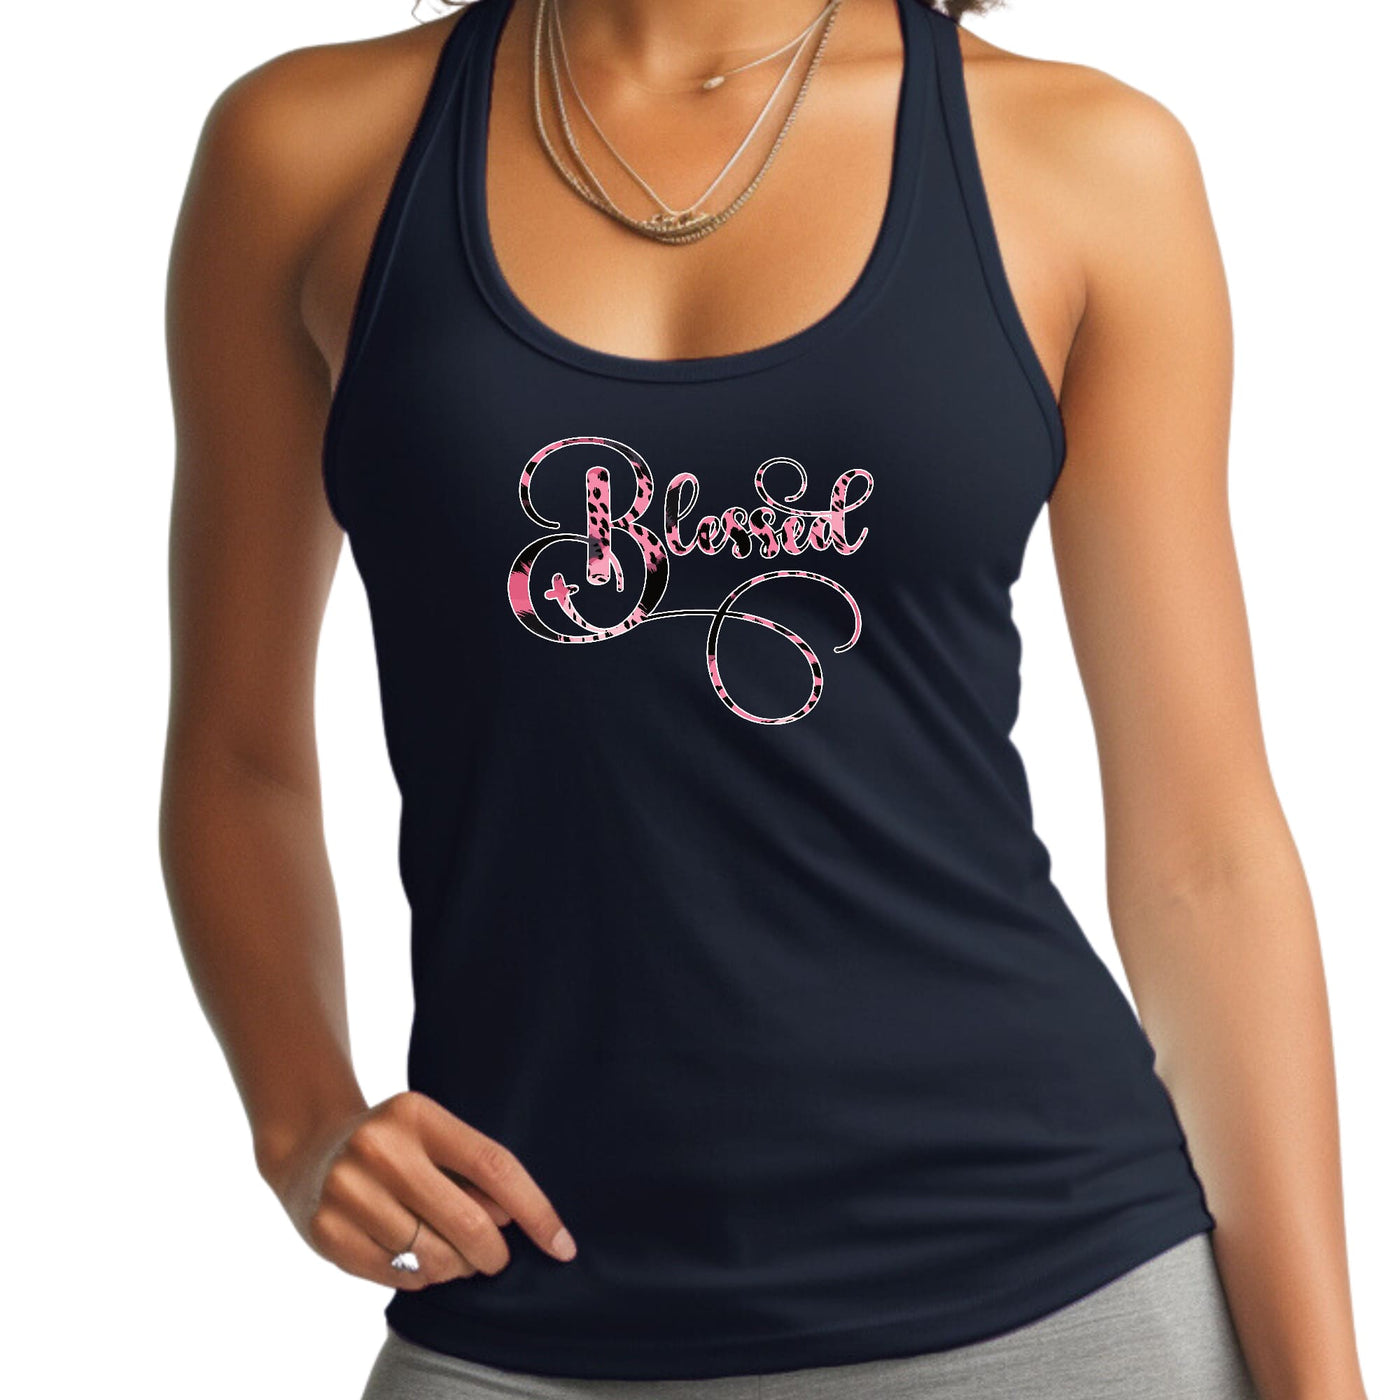 Womens Tank Top Fitness T-shirt Blessed Pink And Black Patterned - Womens